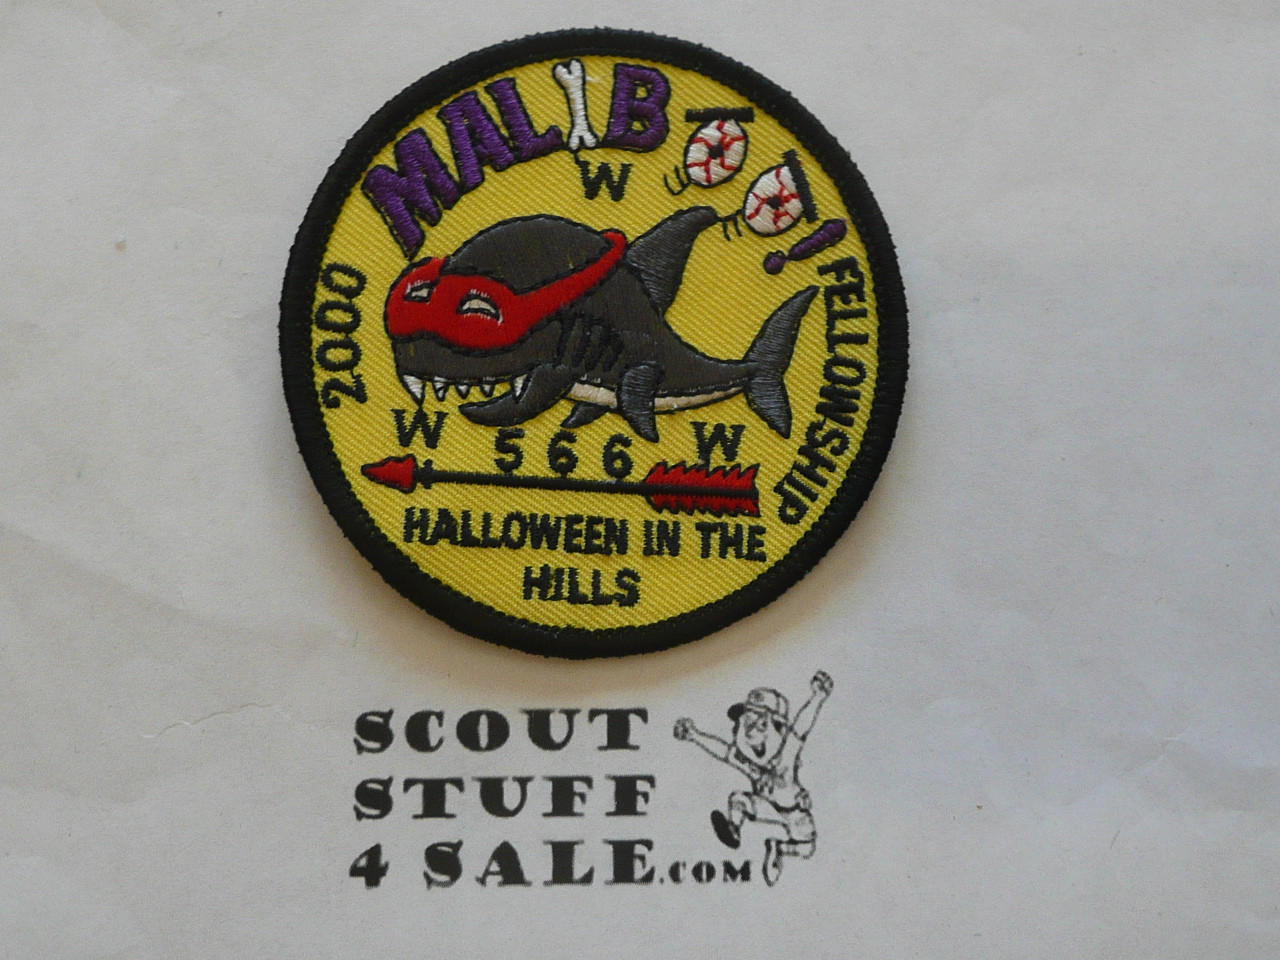 Order of the Arrow Lodge #566 Malibu 2000 Conclave Patch - Scout